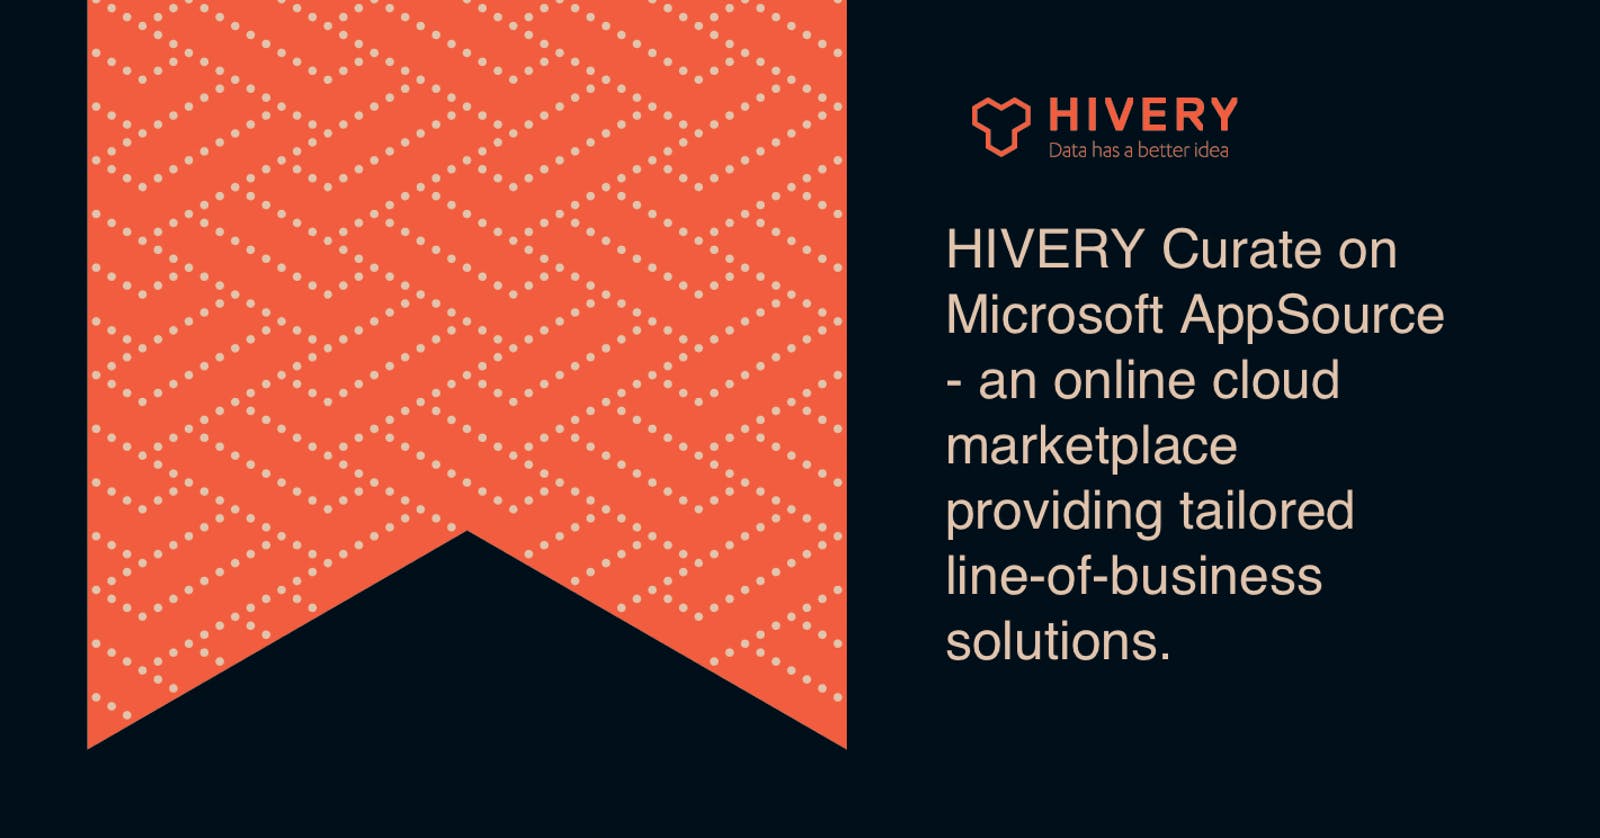 HIVERY Curate Now Available on Microsoft AppSource